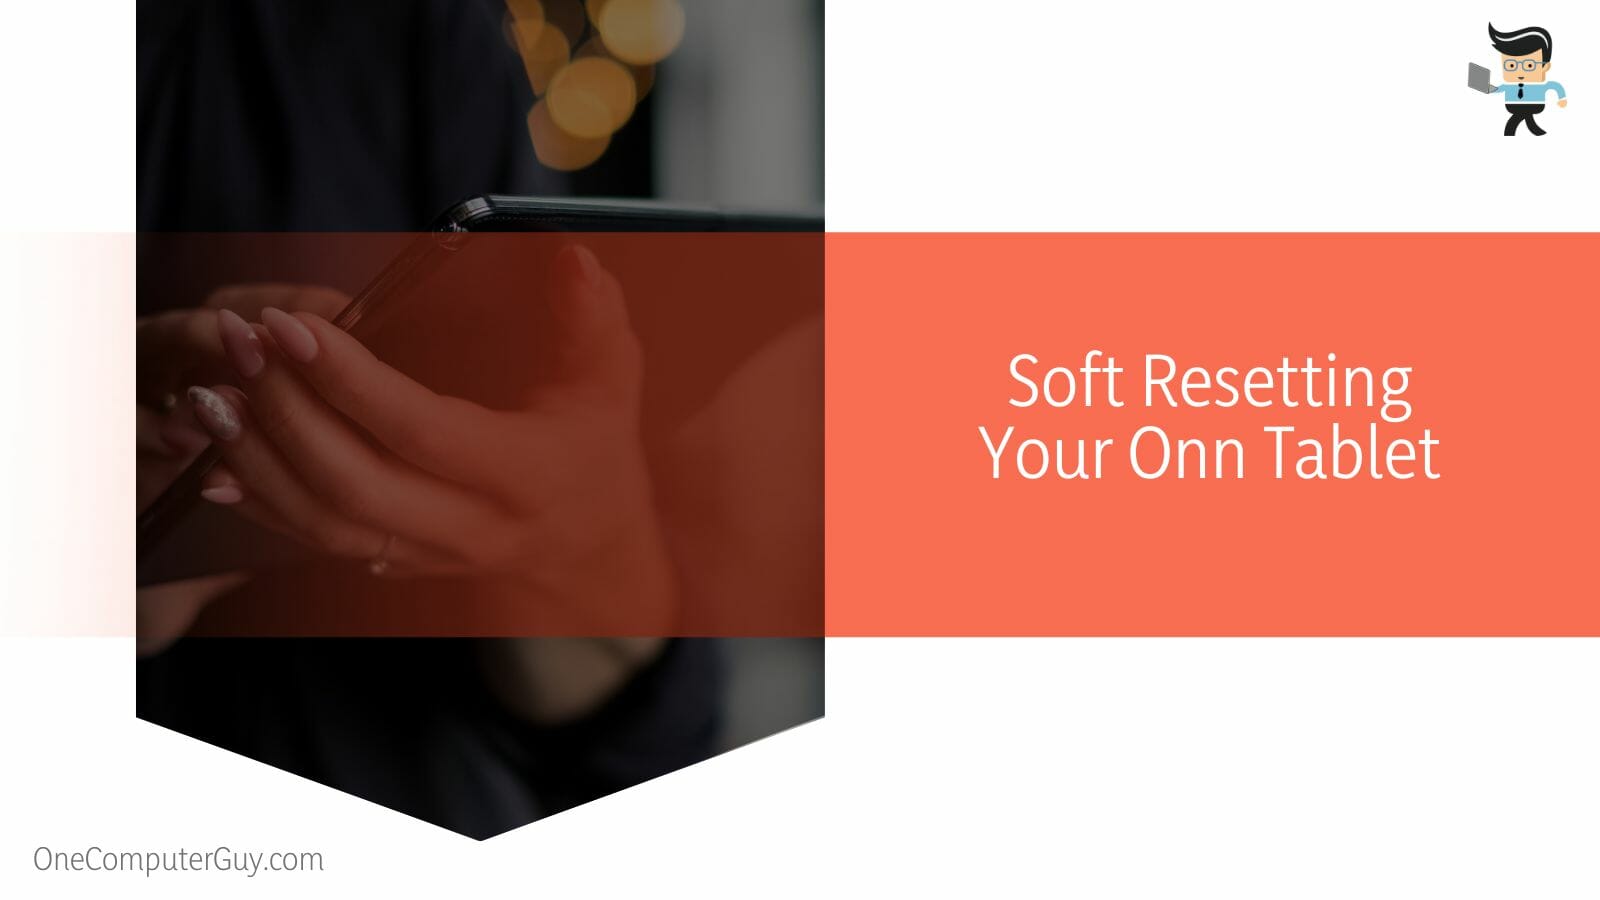 Soft Resetting Your Onn Tablet